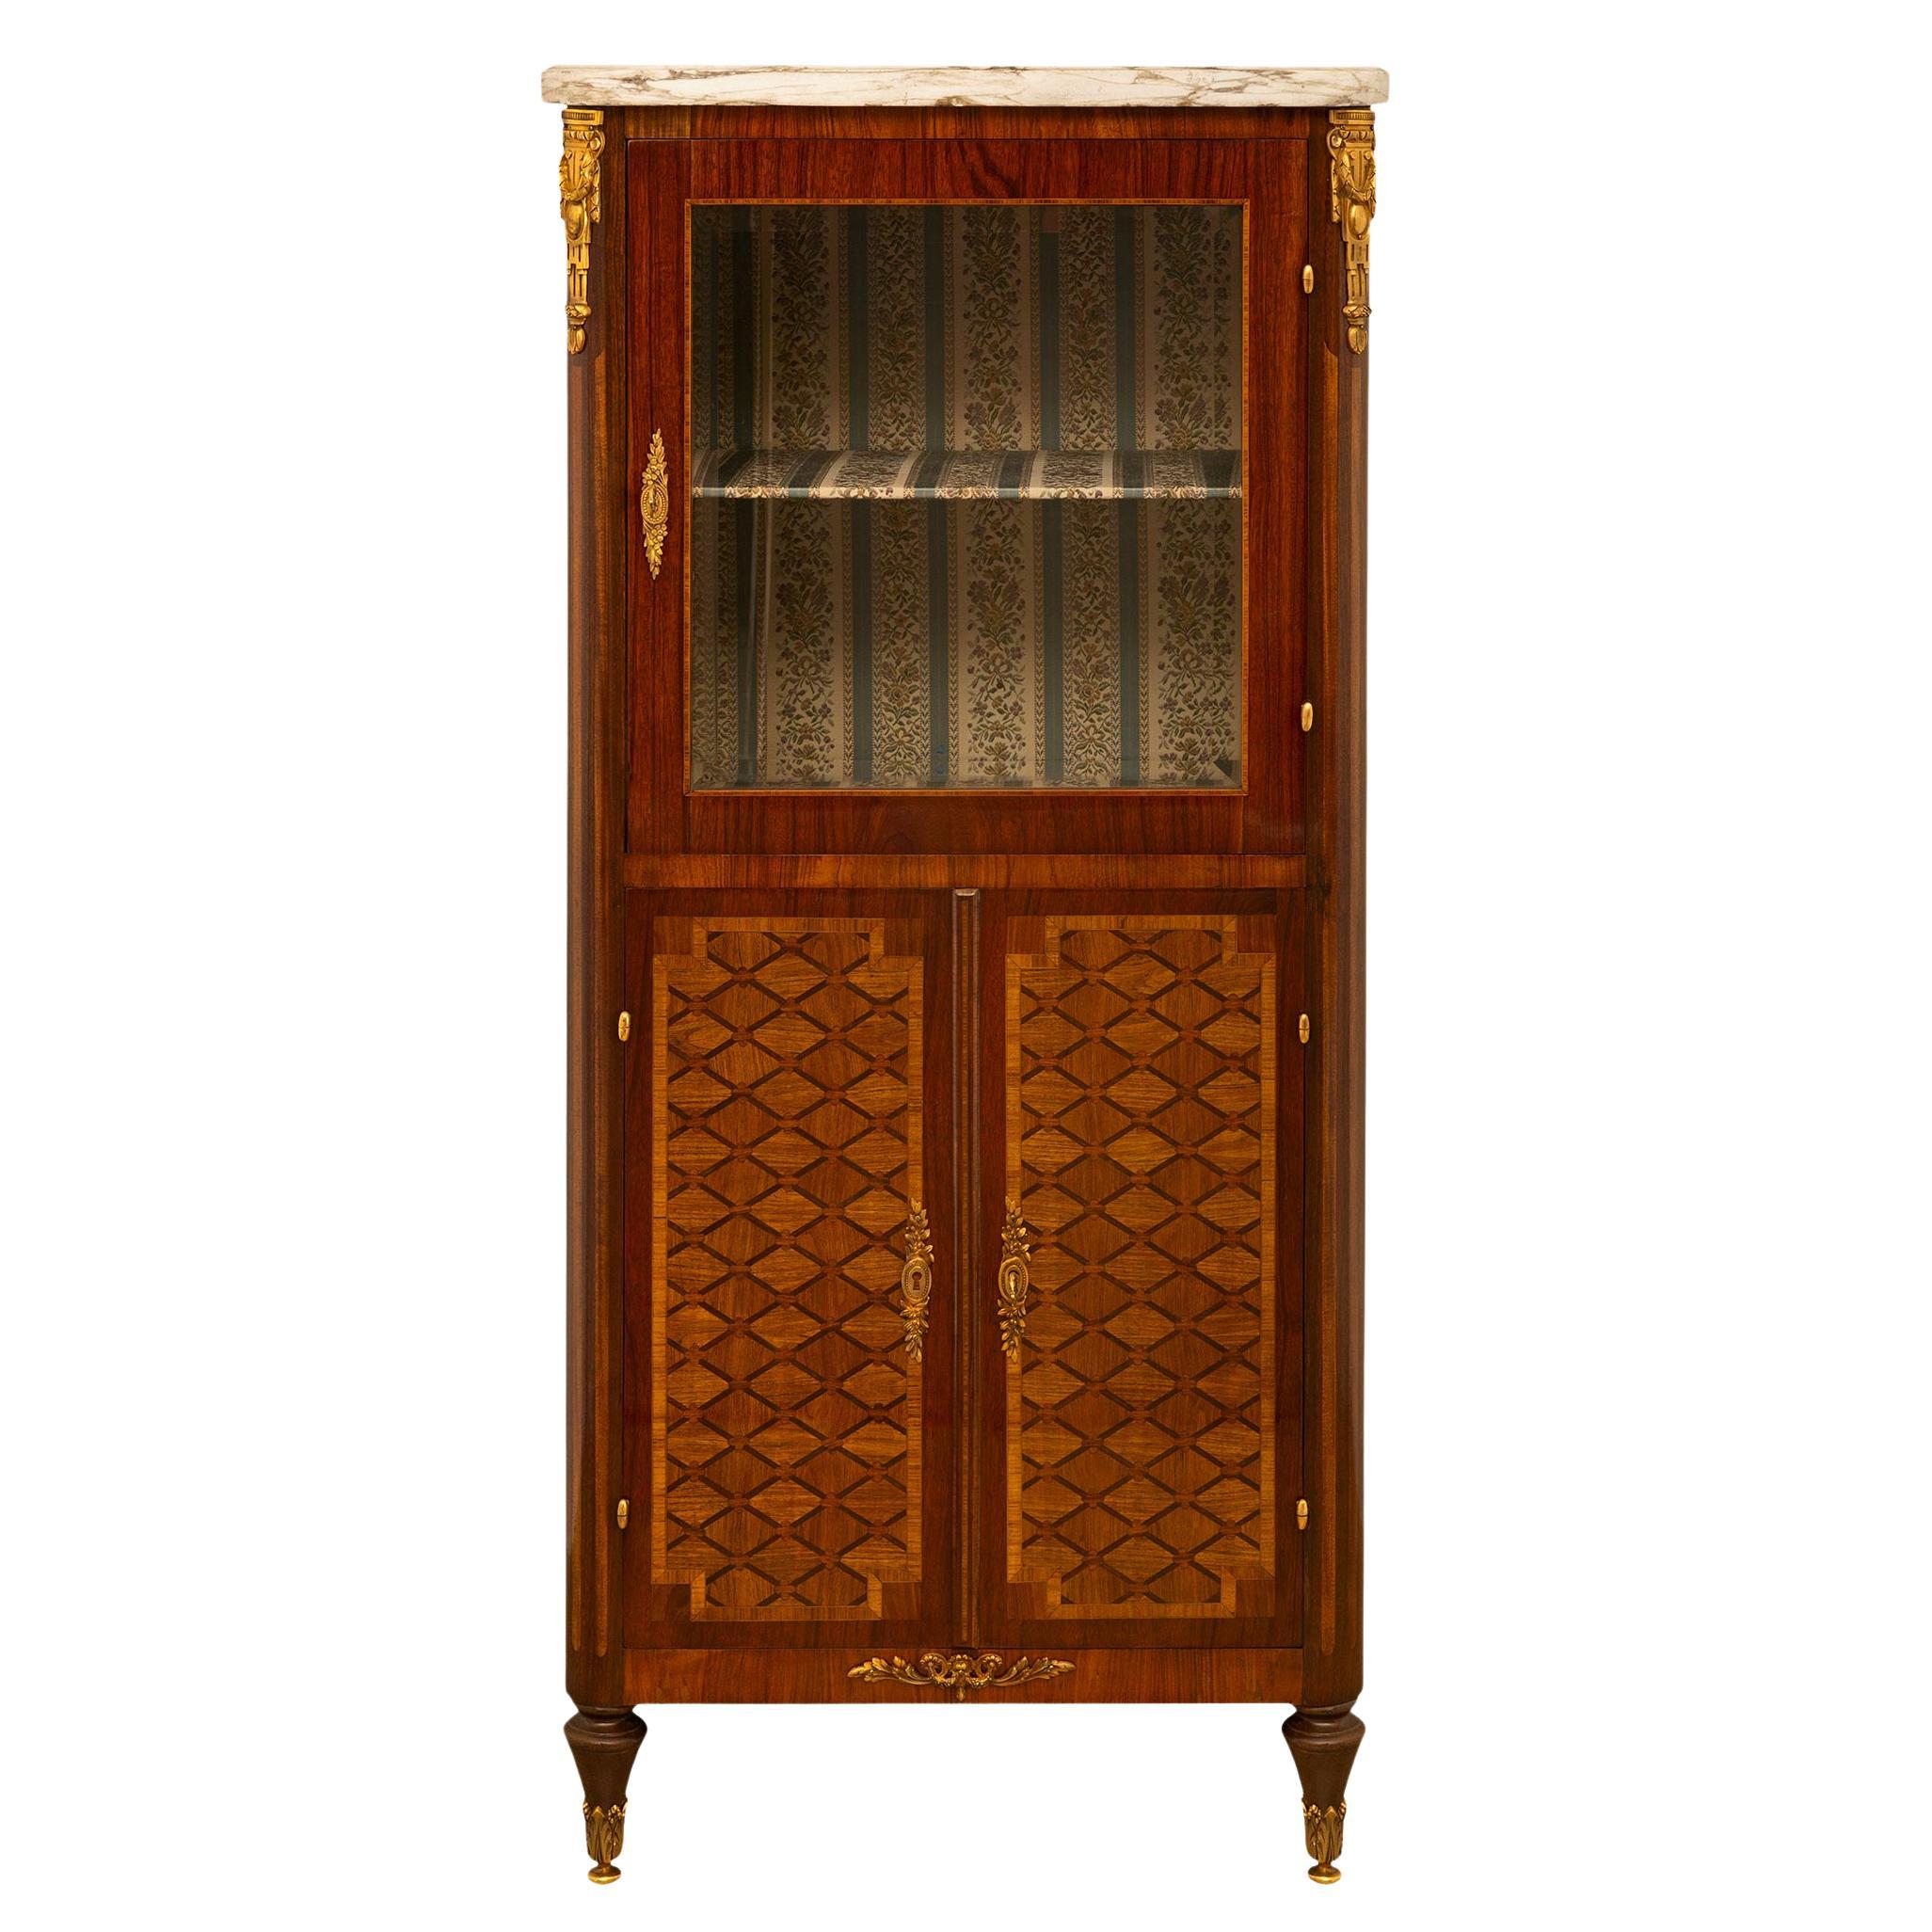 A French 19th Century Louis XVI st. Tulipwood, Kingwood and marble cabinet